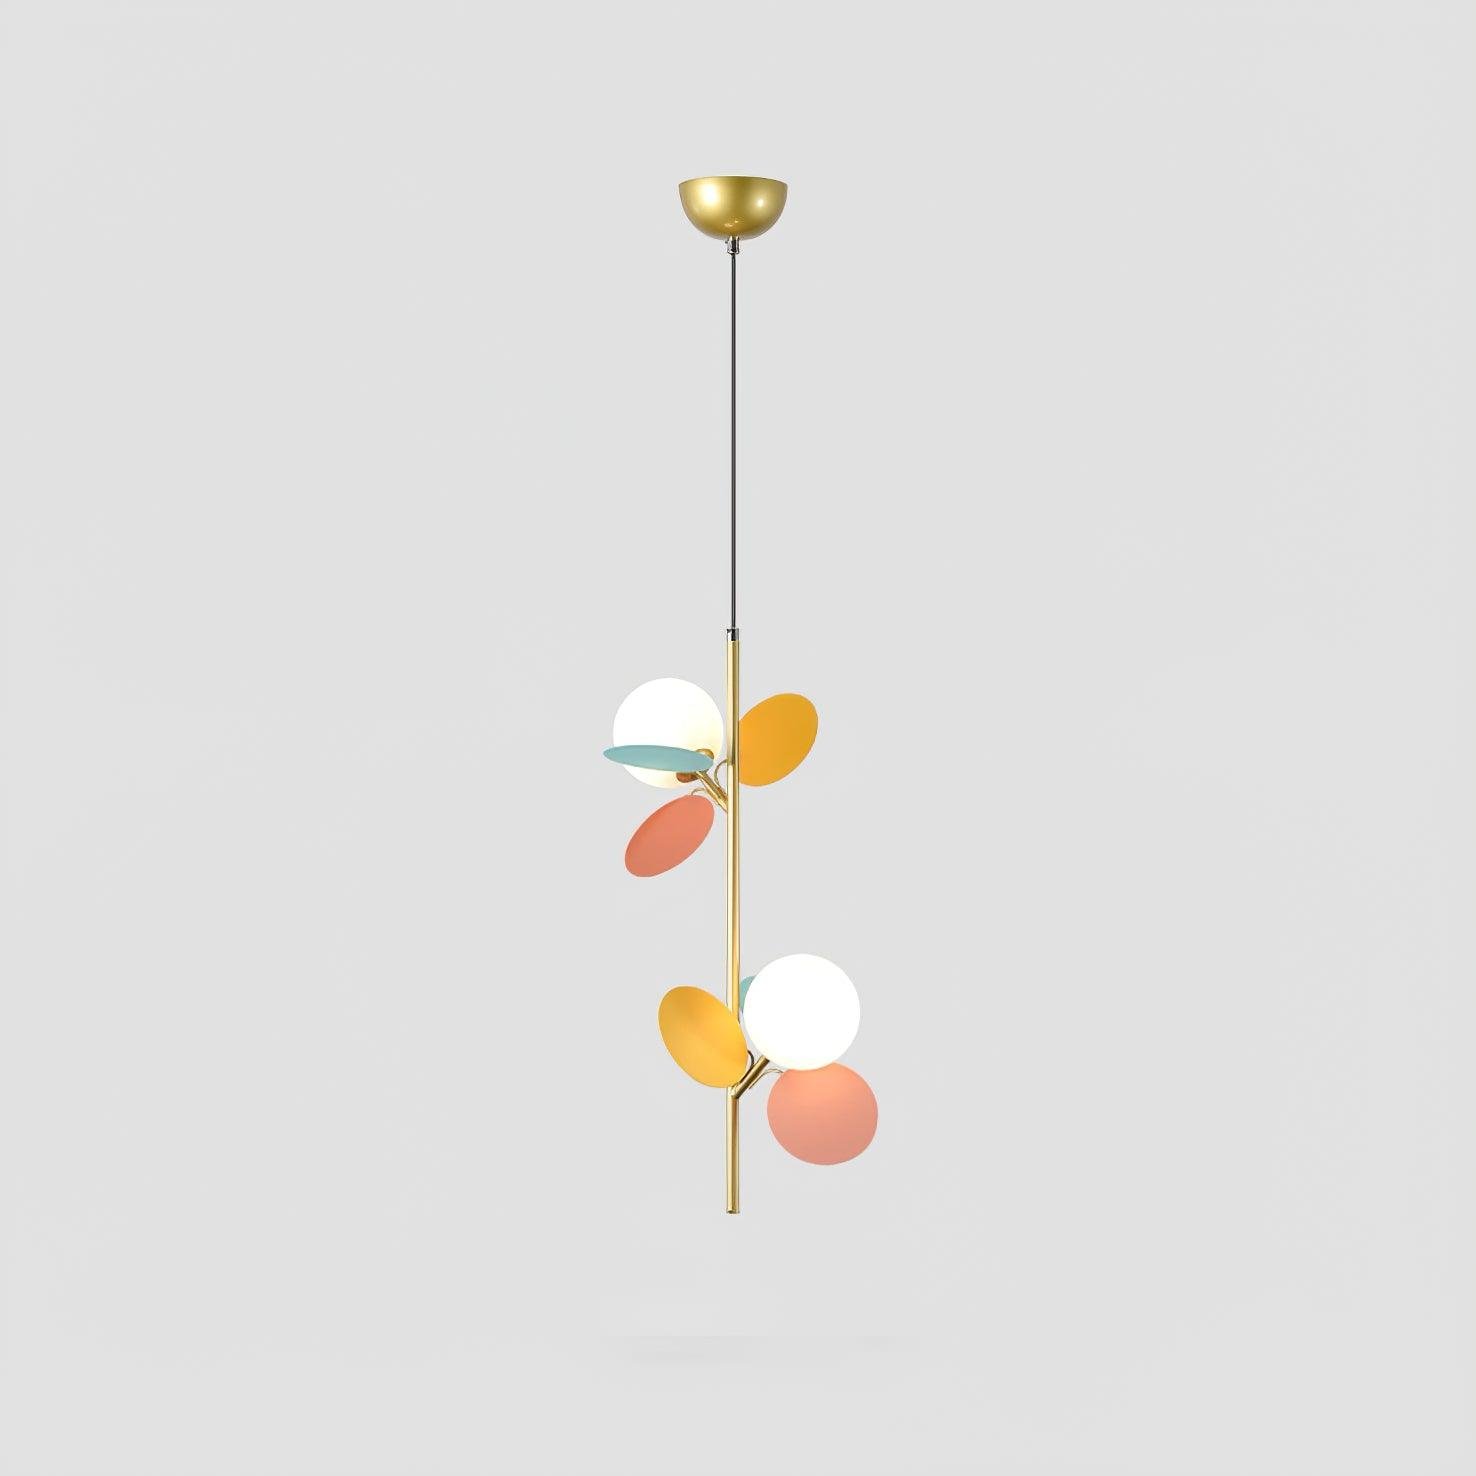 Blanca Pendant Light in Gold and Multicolor, measuring 7.9 inches in diameter and 20.5 inches in height (20cm x 52cm)